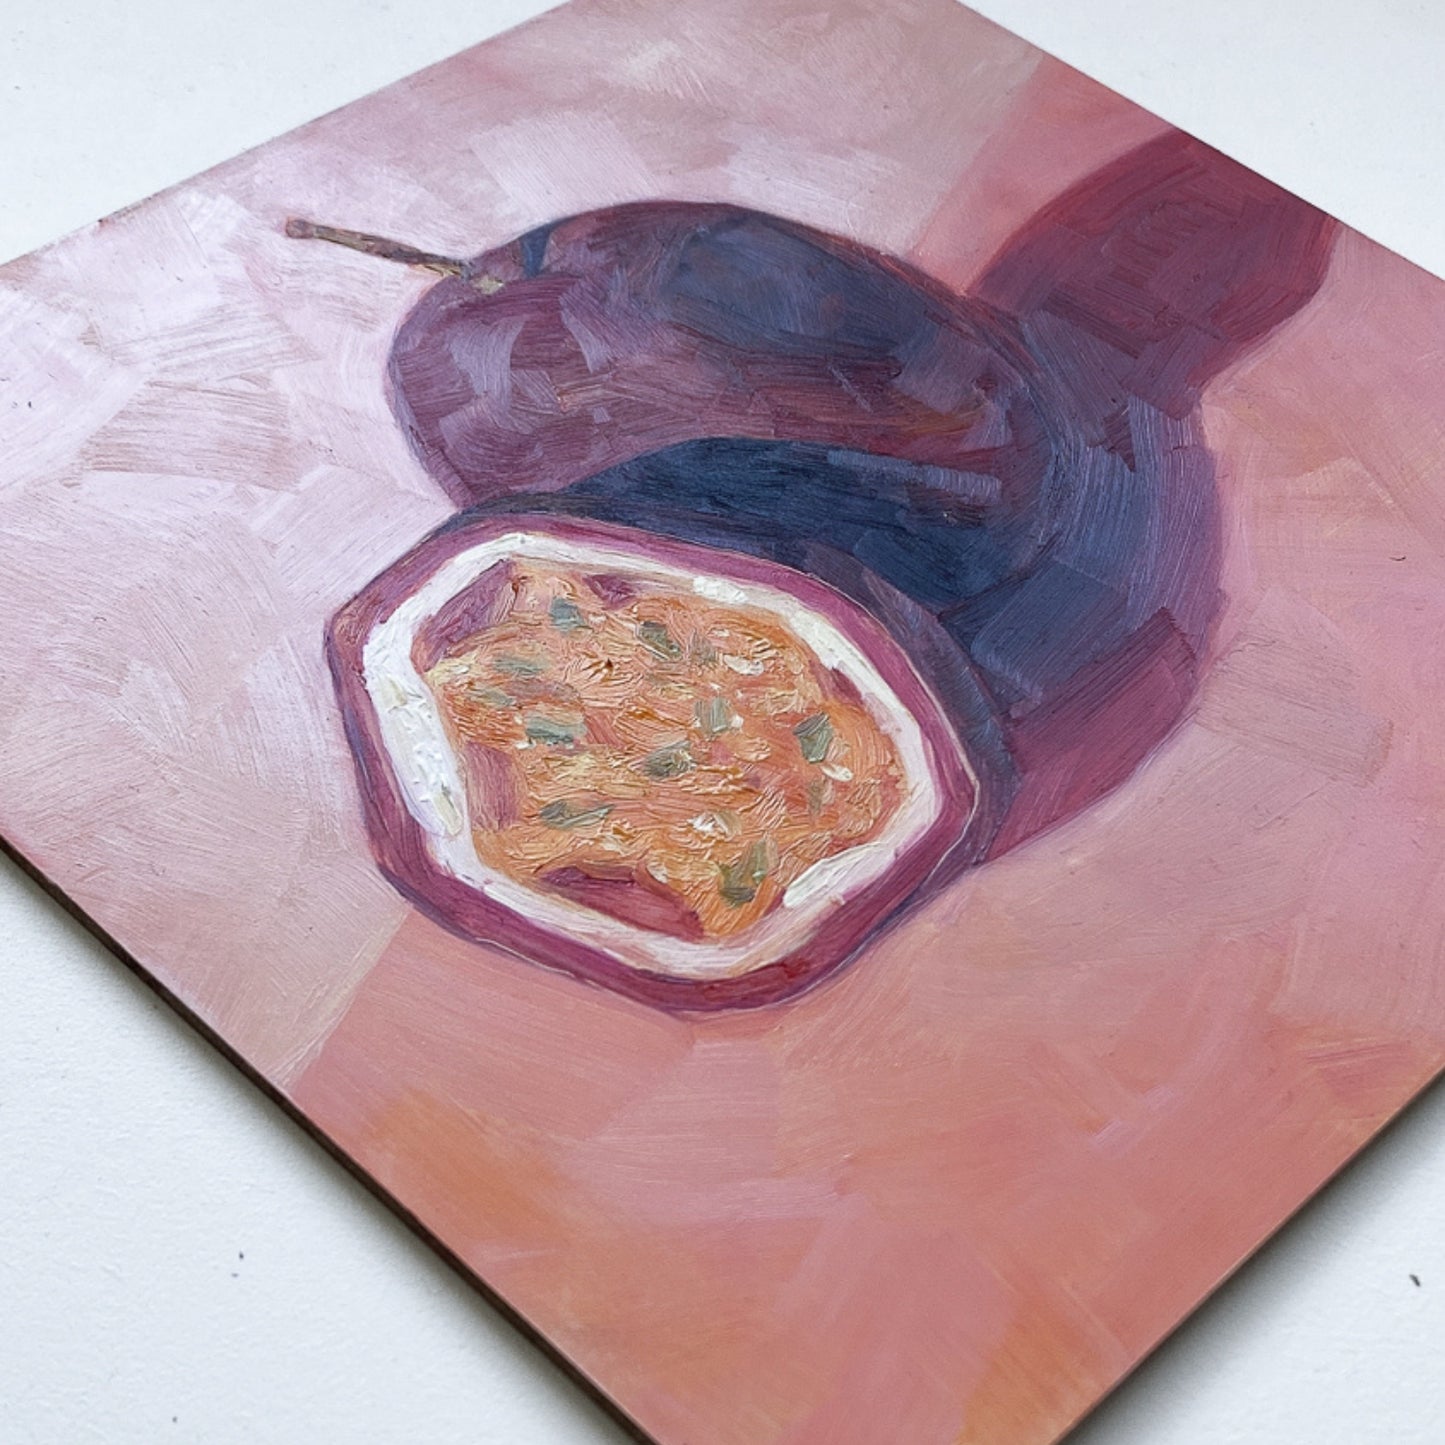 an original painting of a burgundy, magenta whole passionfruit and half a passionfruit with seeds. They are sitting on a soft pink surface and there are strong shadows and a diagonal background. The painting is on a white surface.